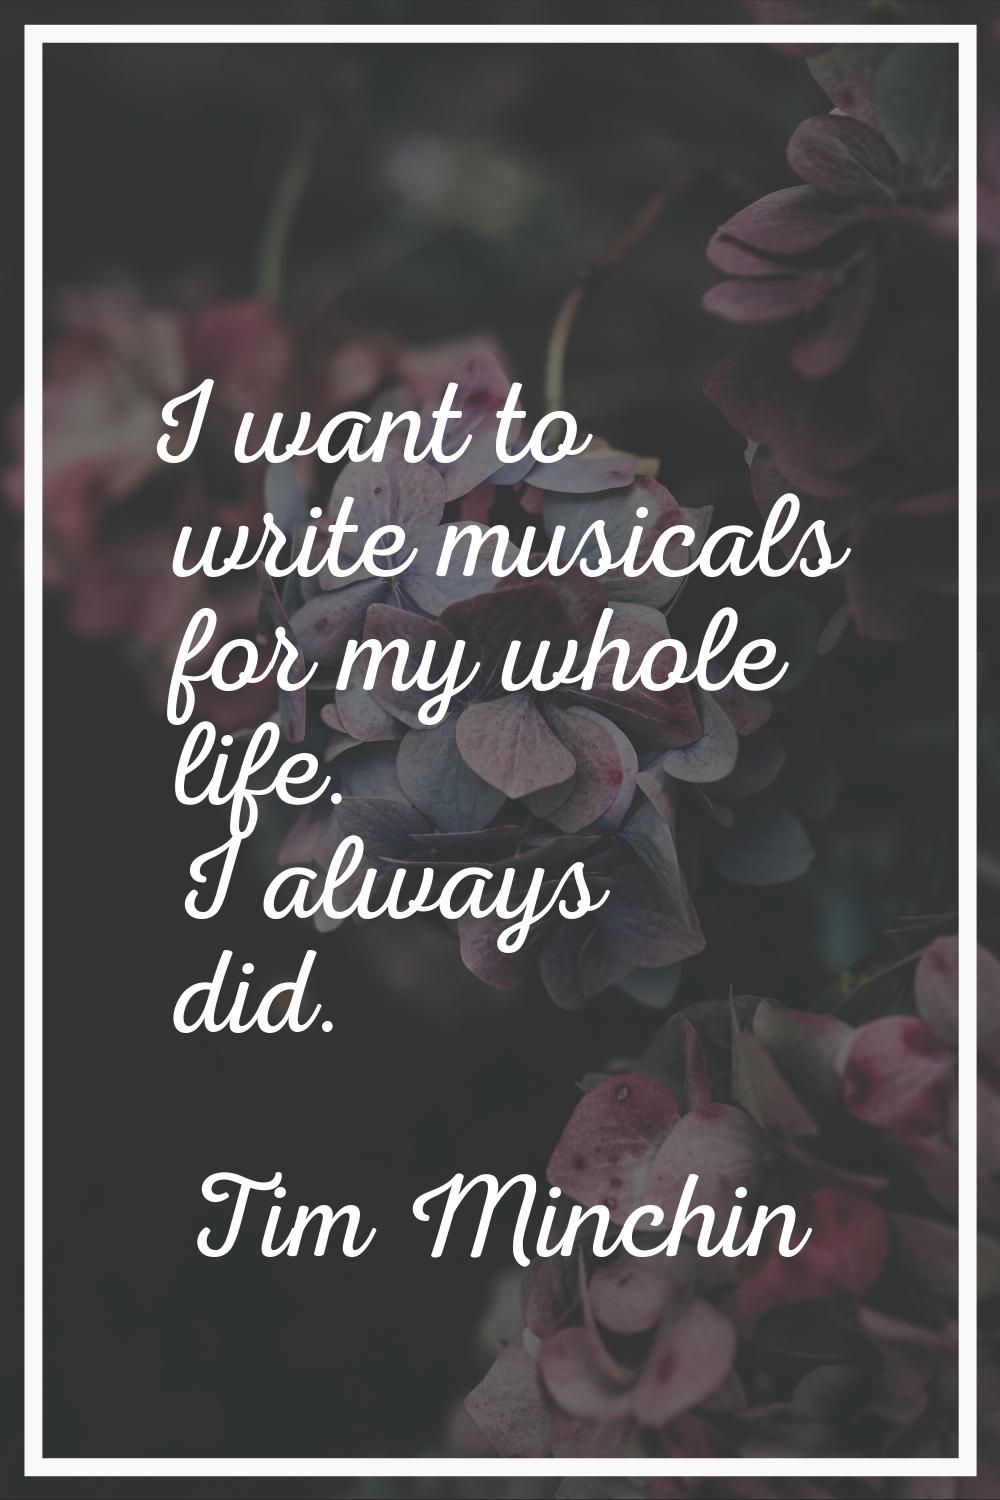 I want to write musicals for my whole life. I always did.